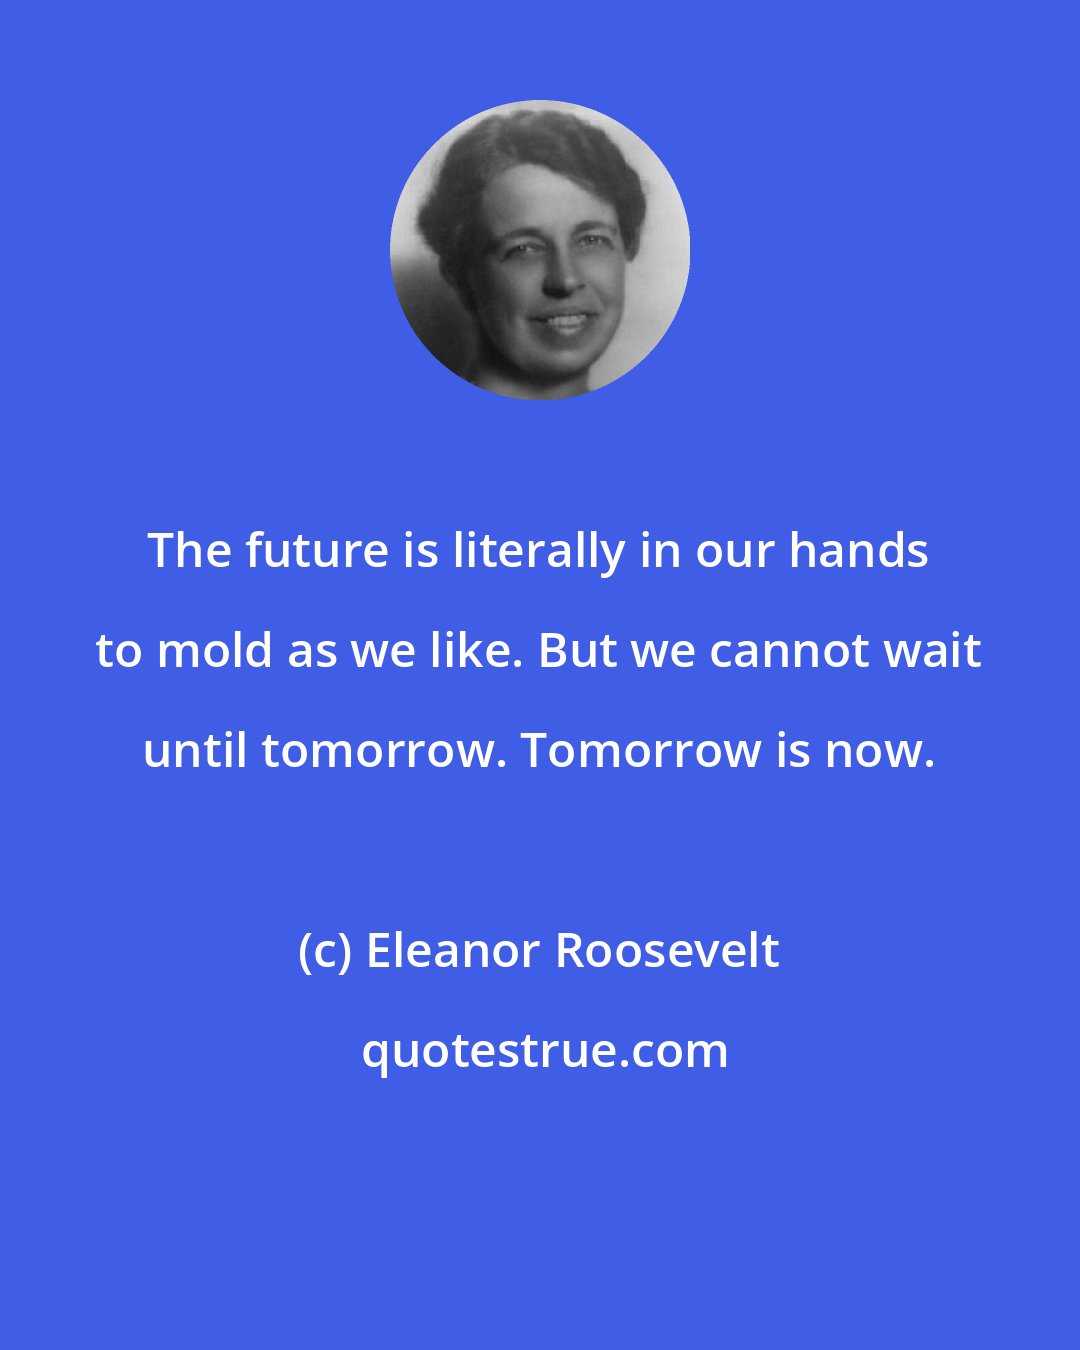 Eleanor Roosevelt: The future is literally in our hands to mold as we like. But we cannot wait until tomorrow. Tomorrow is now.